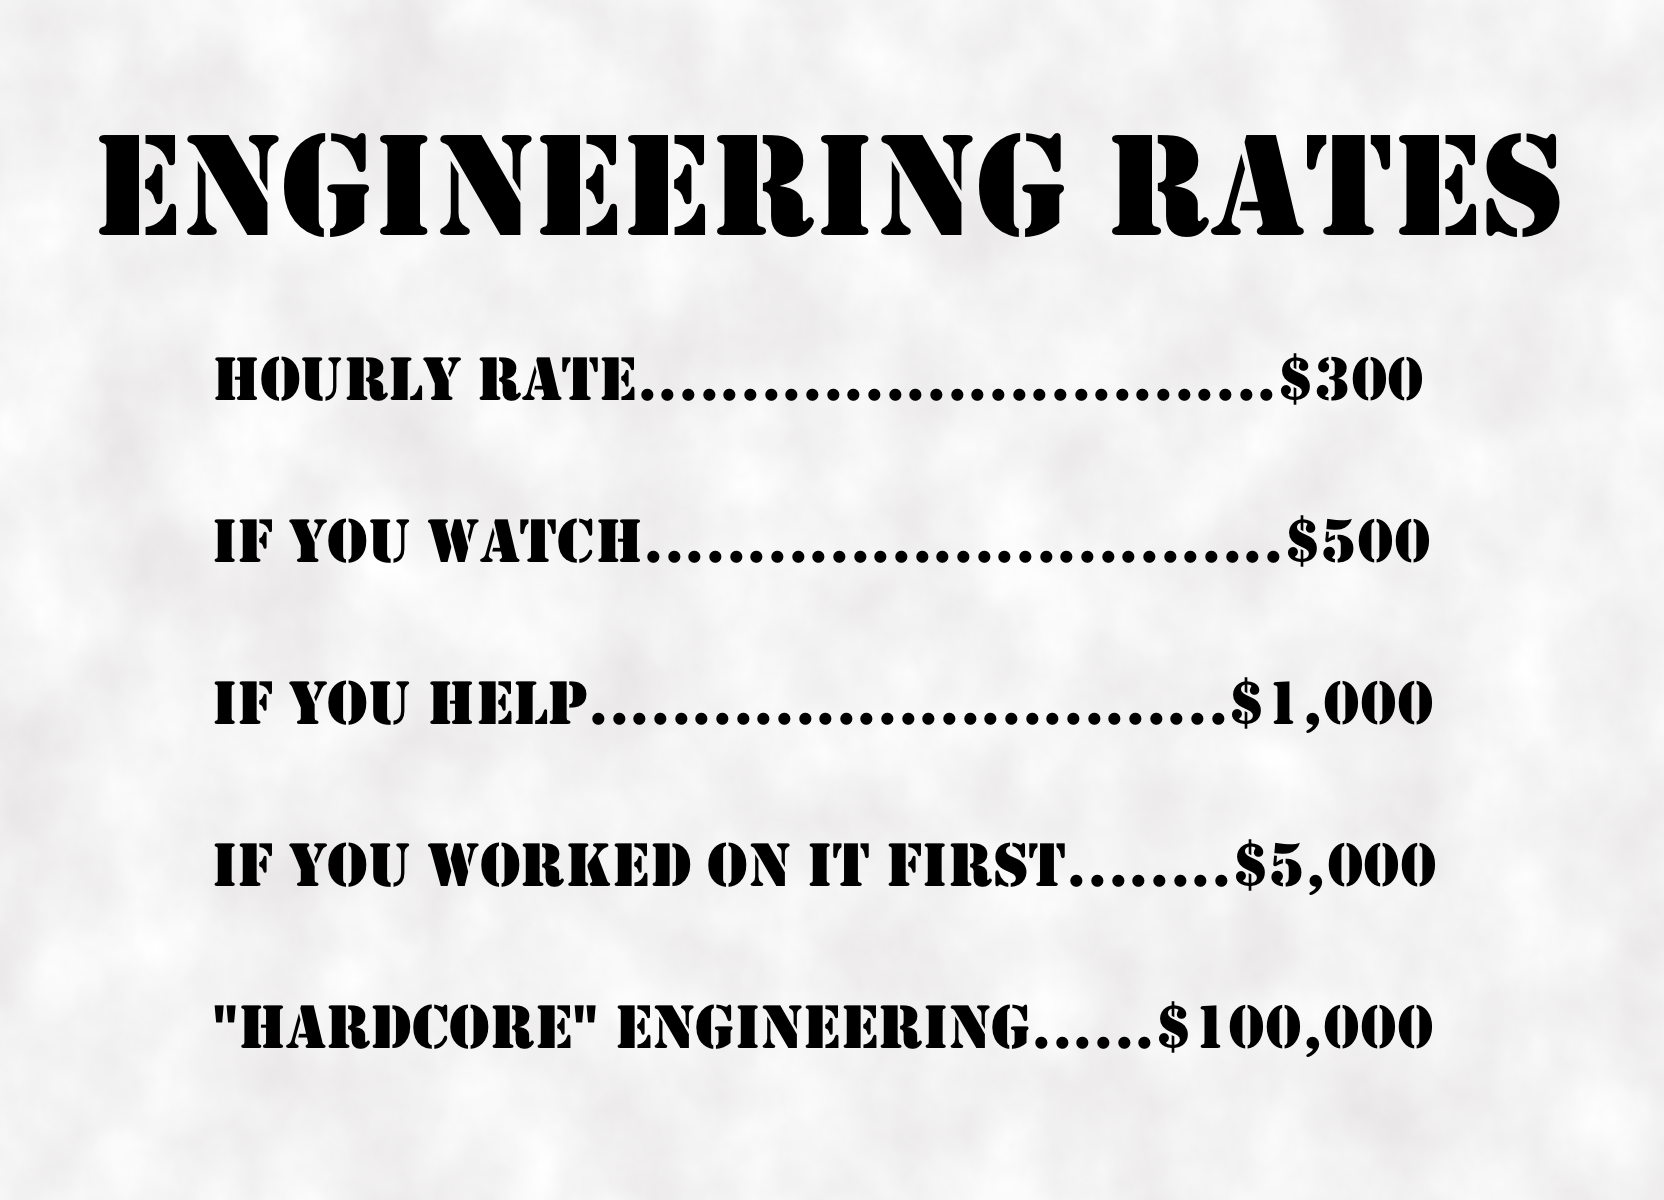 A list of "Engineering Rates" proceeding from a baseline $300 hourly rate to $500 "If you Watch", $1000 "If You Help", $5000 "If you worked on it first", and $100,000 for "Hardcore Engineering."